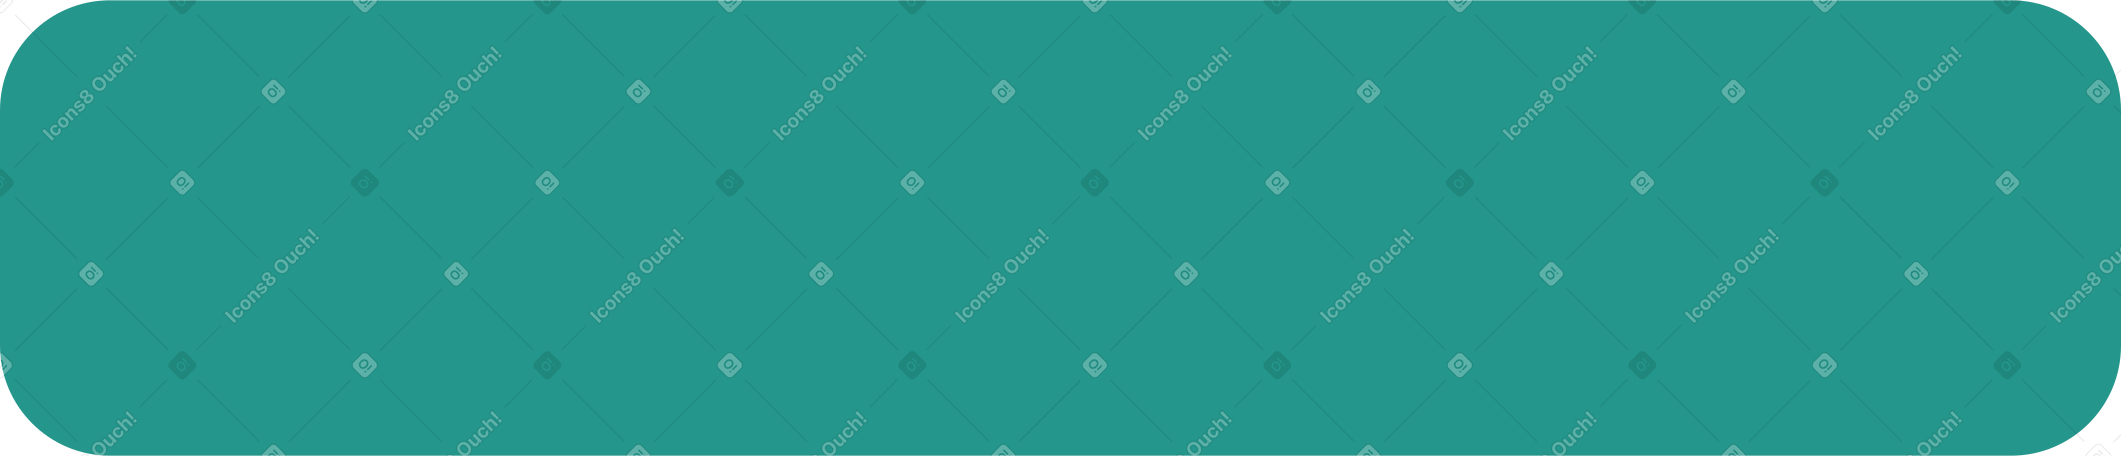 big green rectangular button with rounded corners Illustration in PNG, SVG